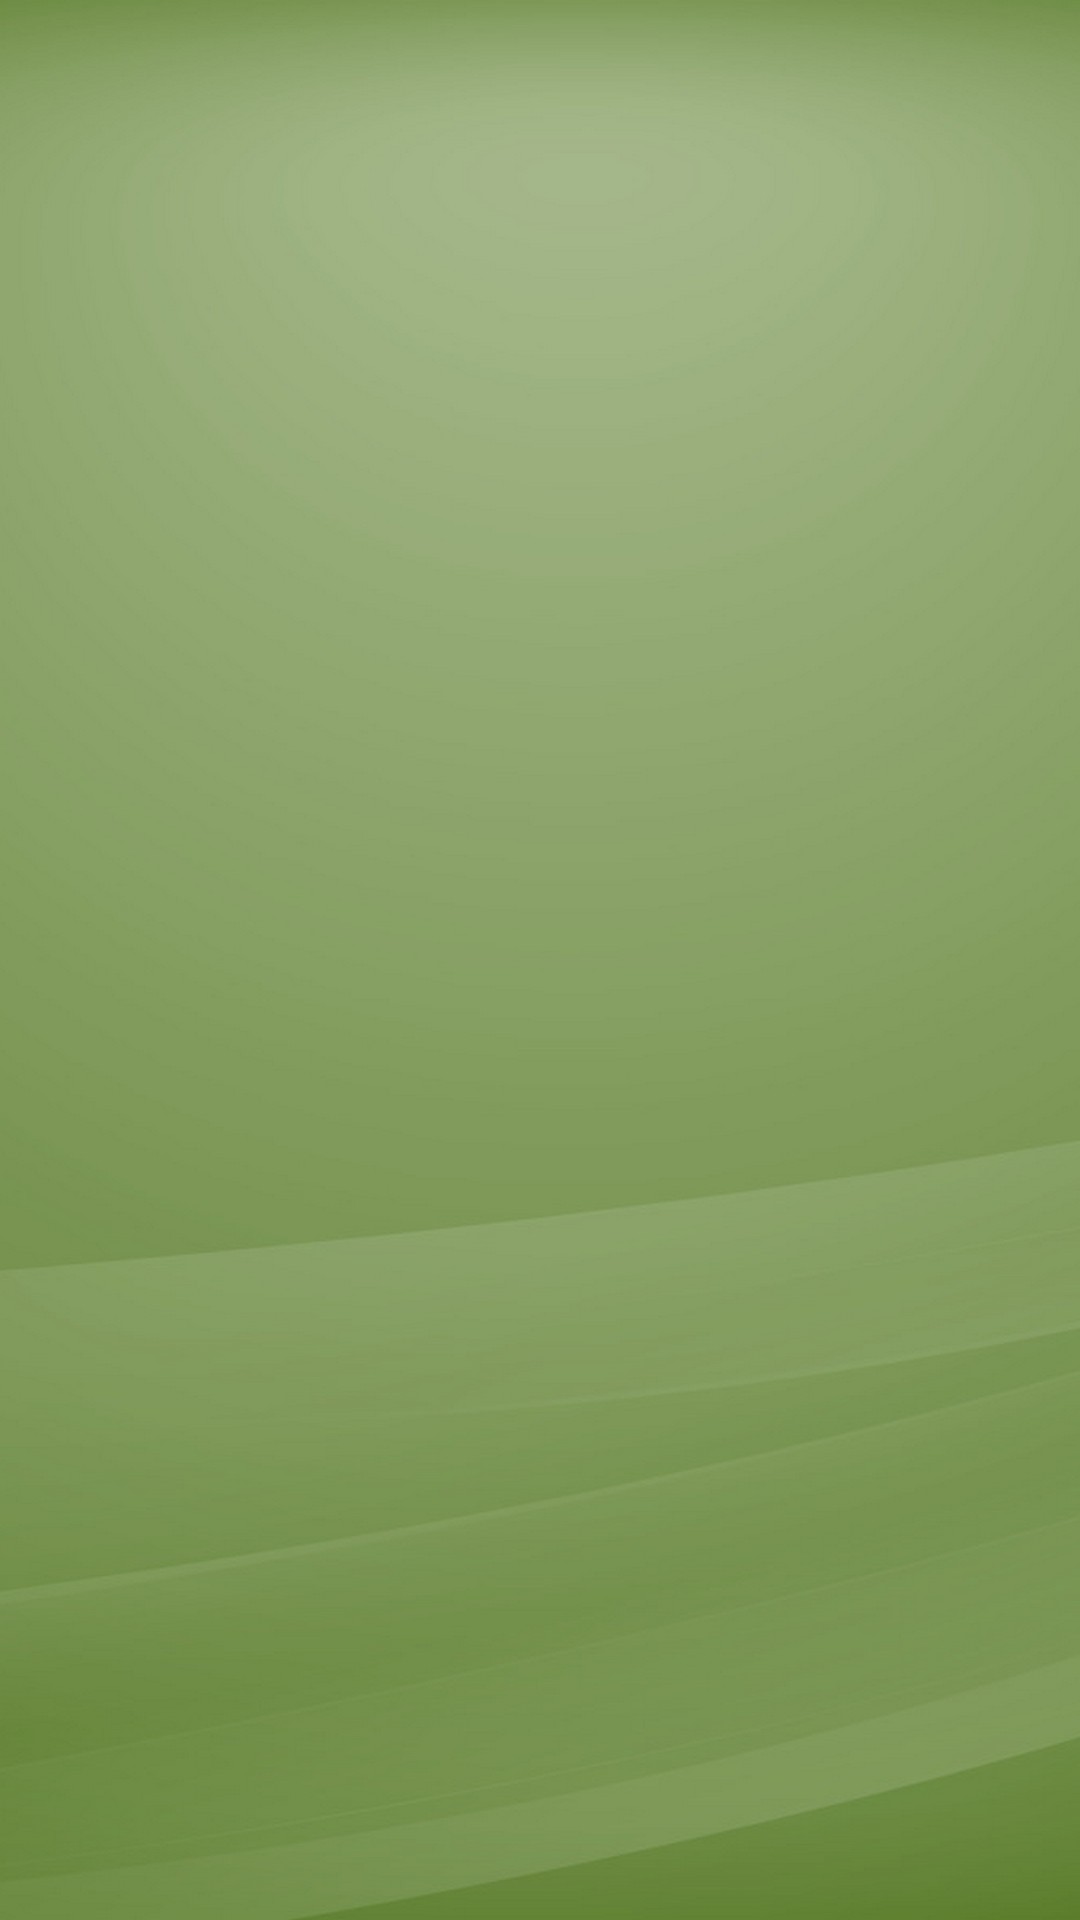 Iphone X Wallpaper Green Colour With Image Resolution - 1080x1920 Wallpaper  